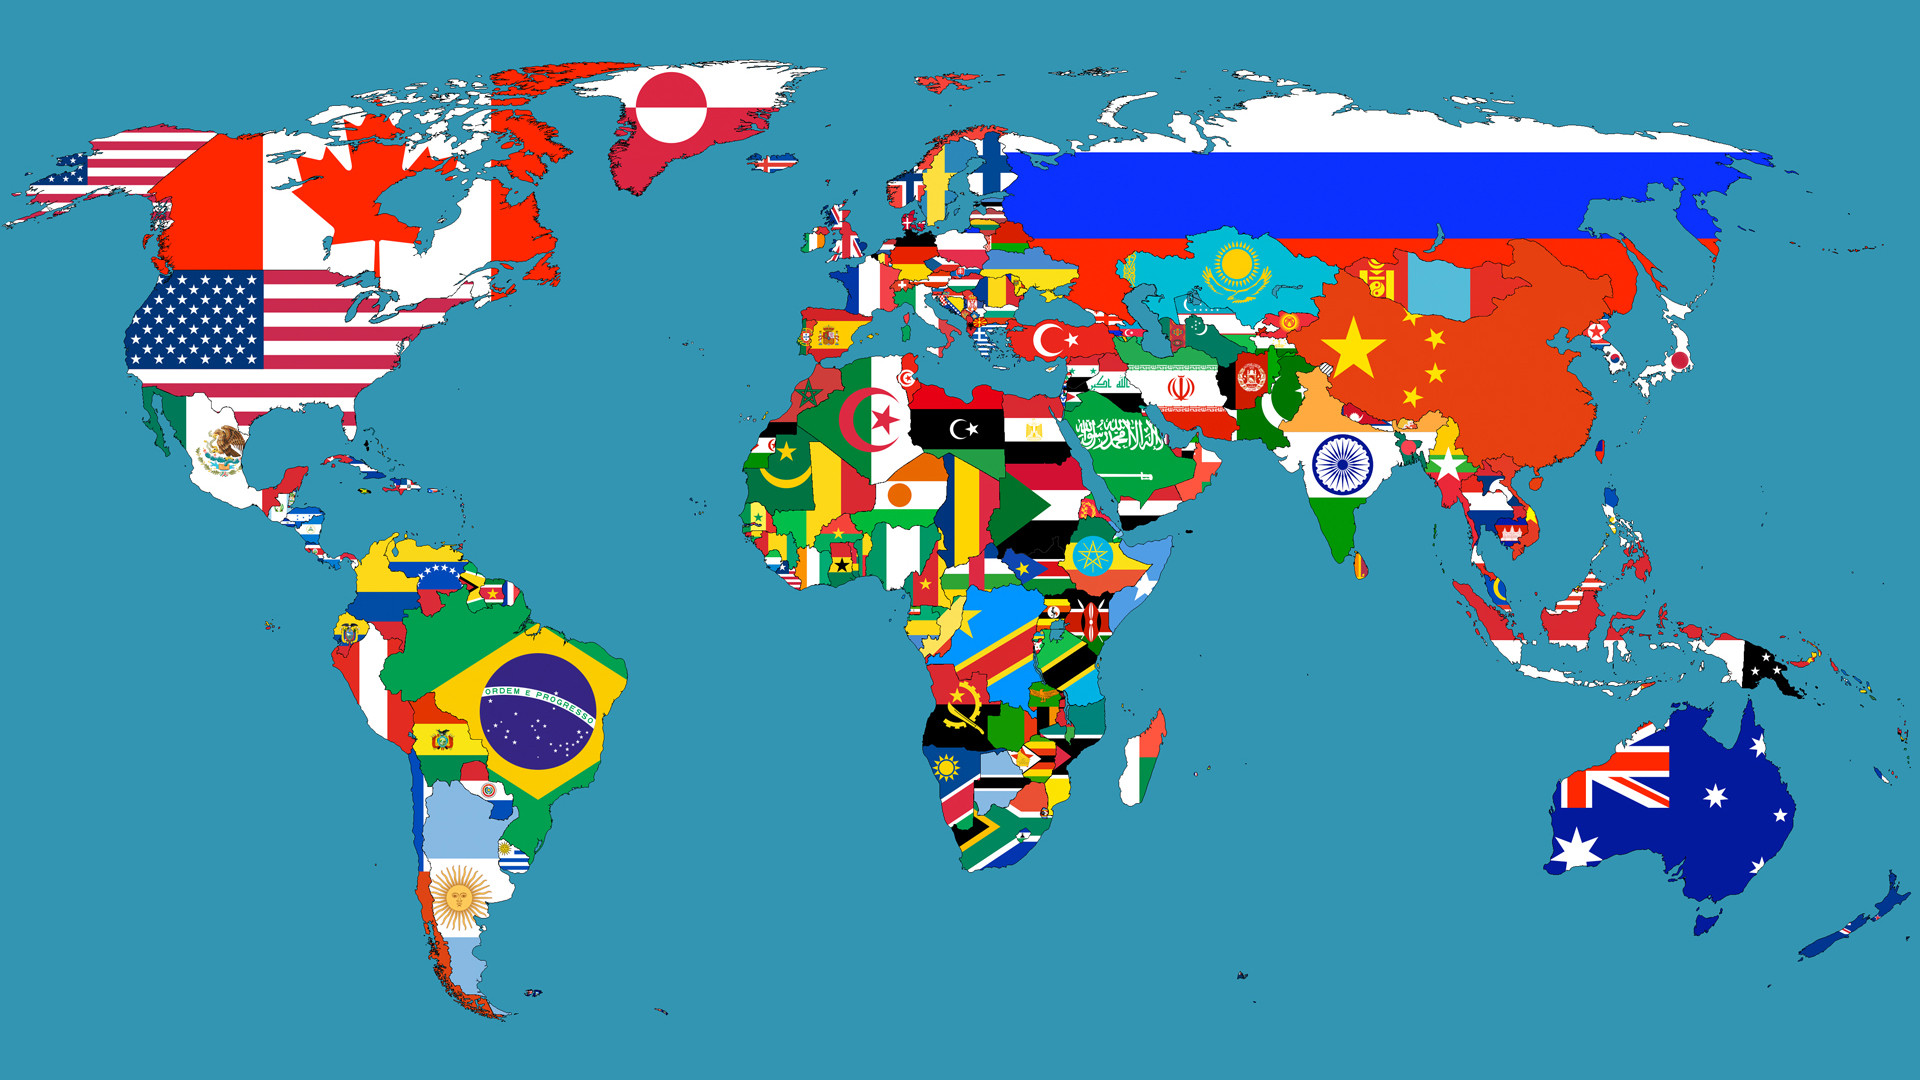 The Flags Of The World Planet Geography